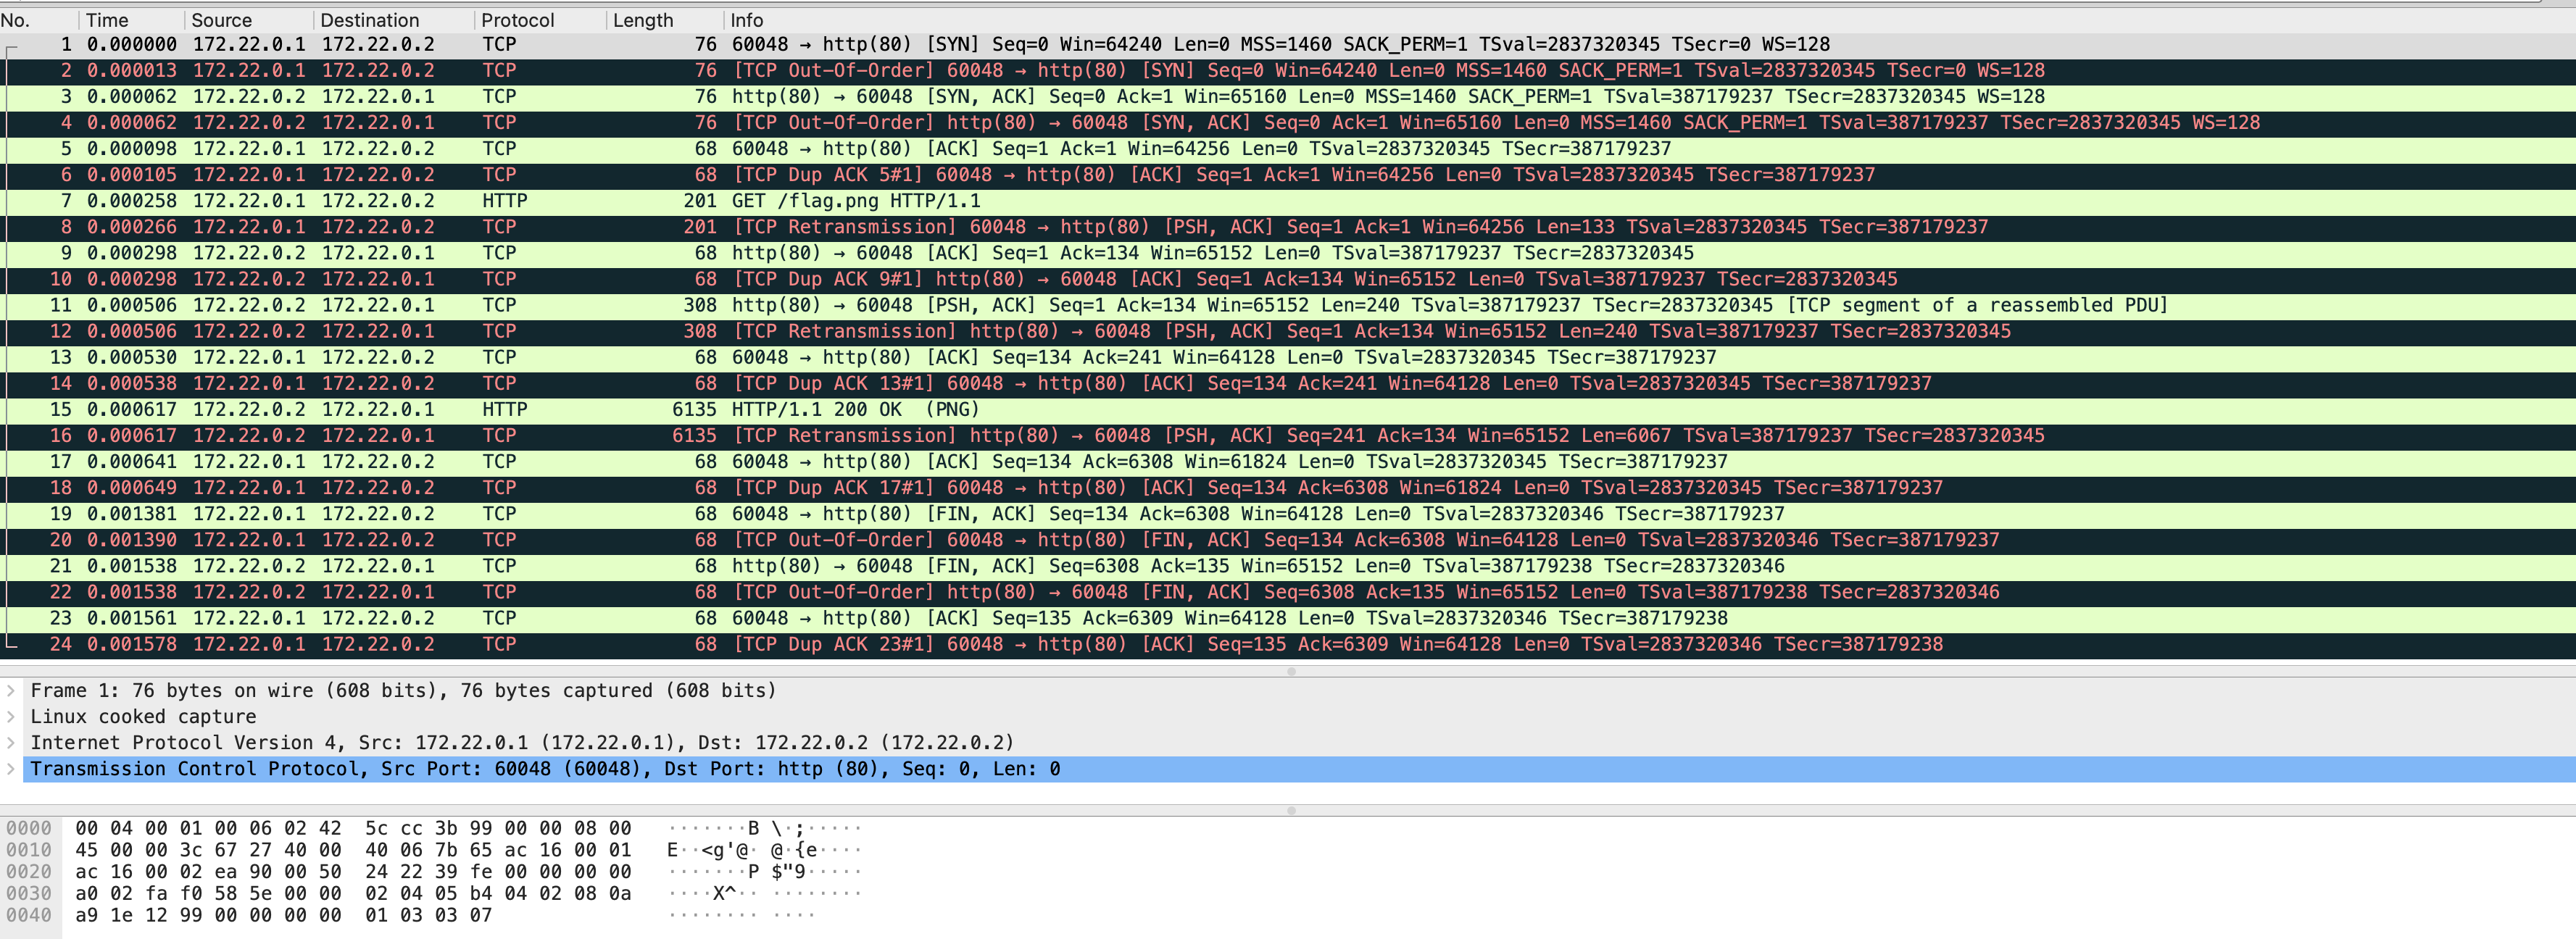 wireshark-output.png